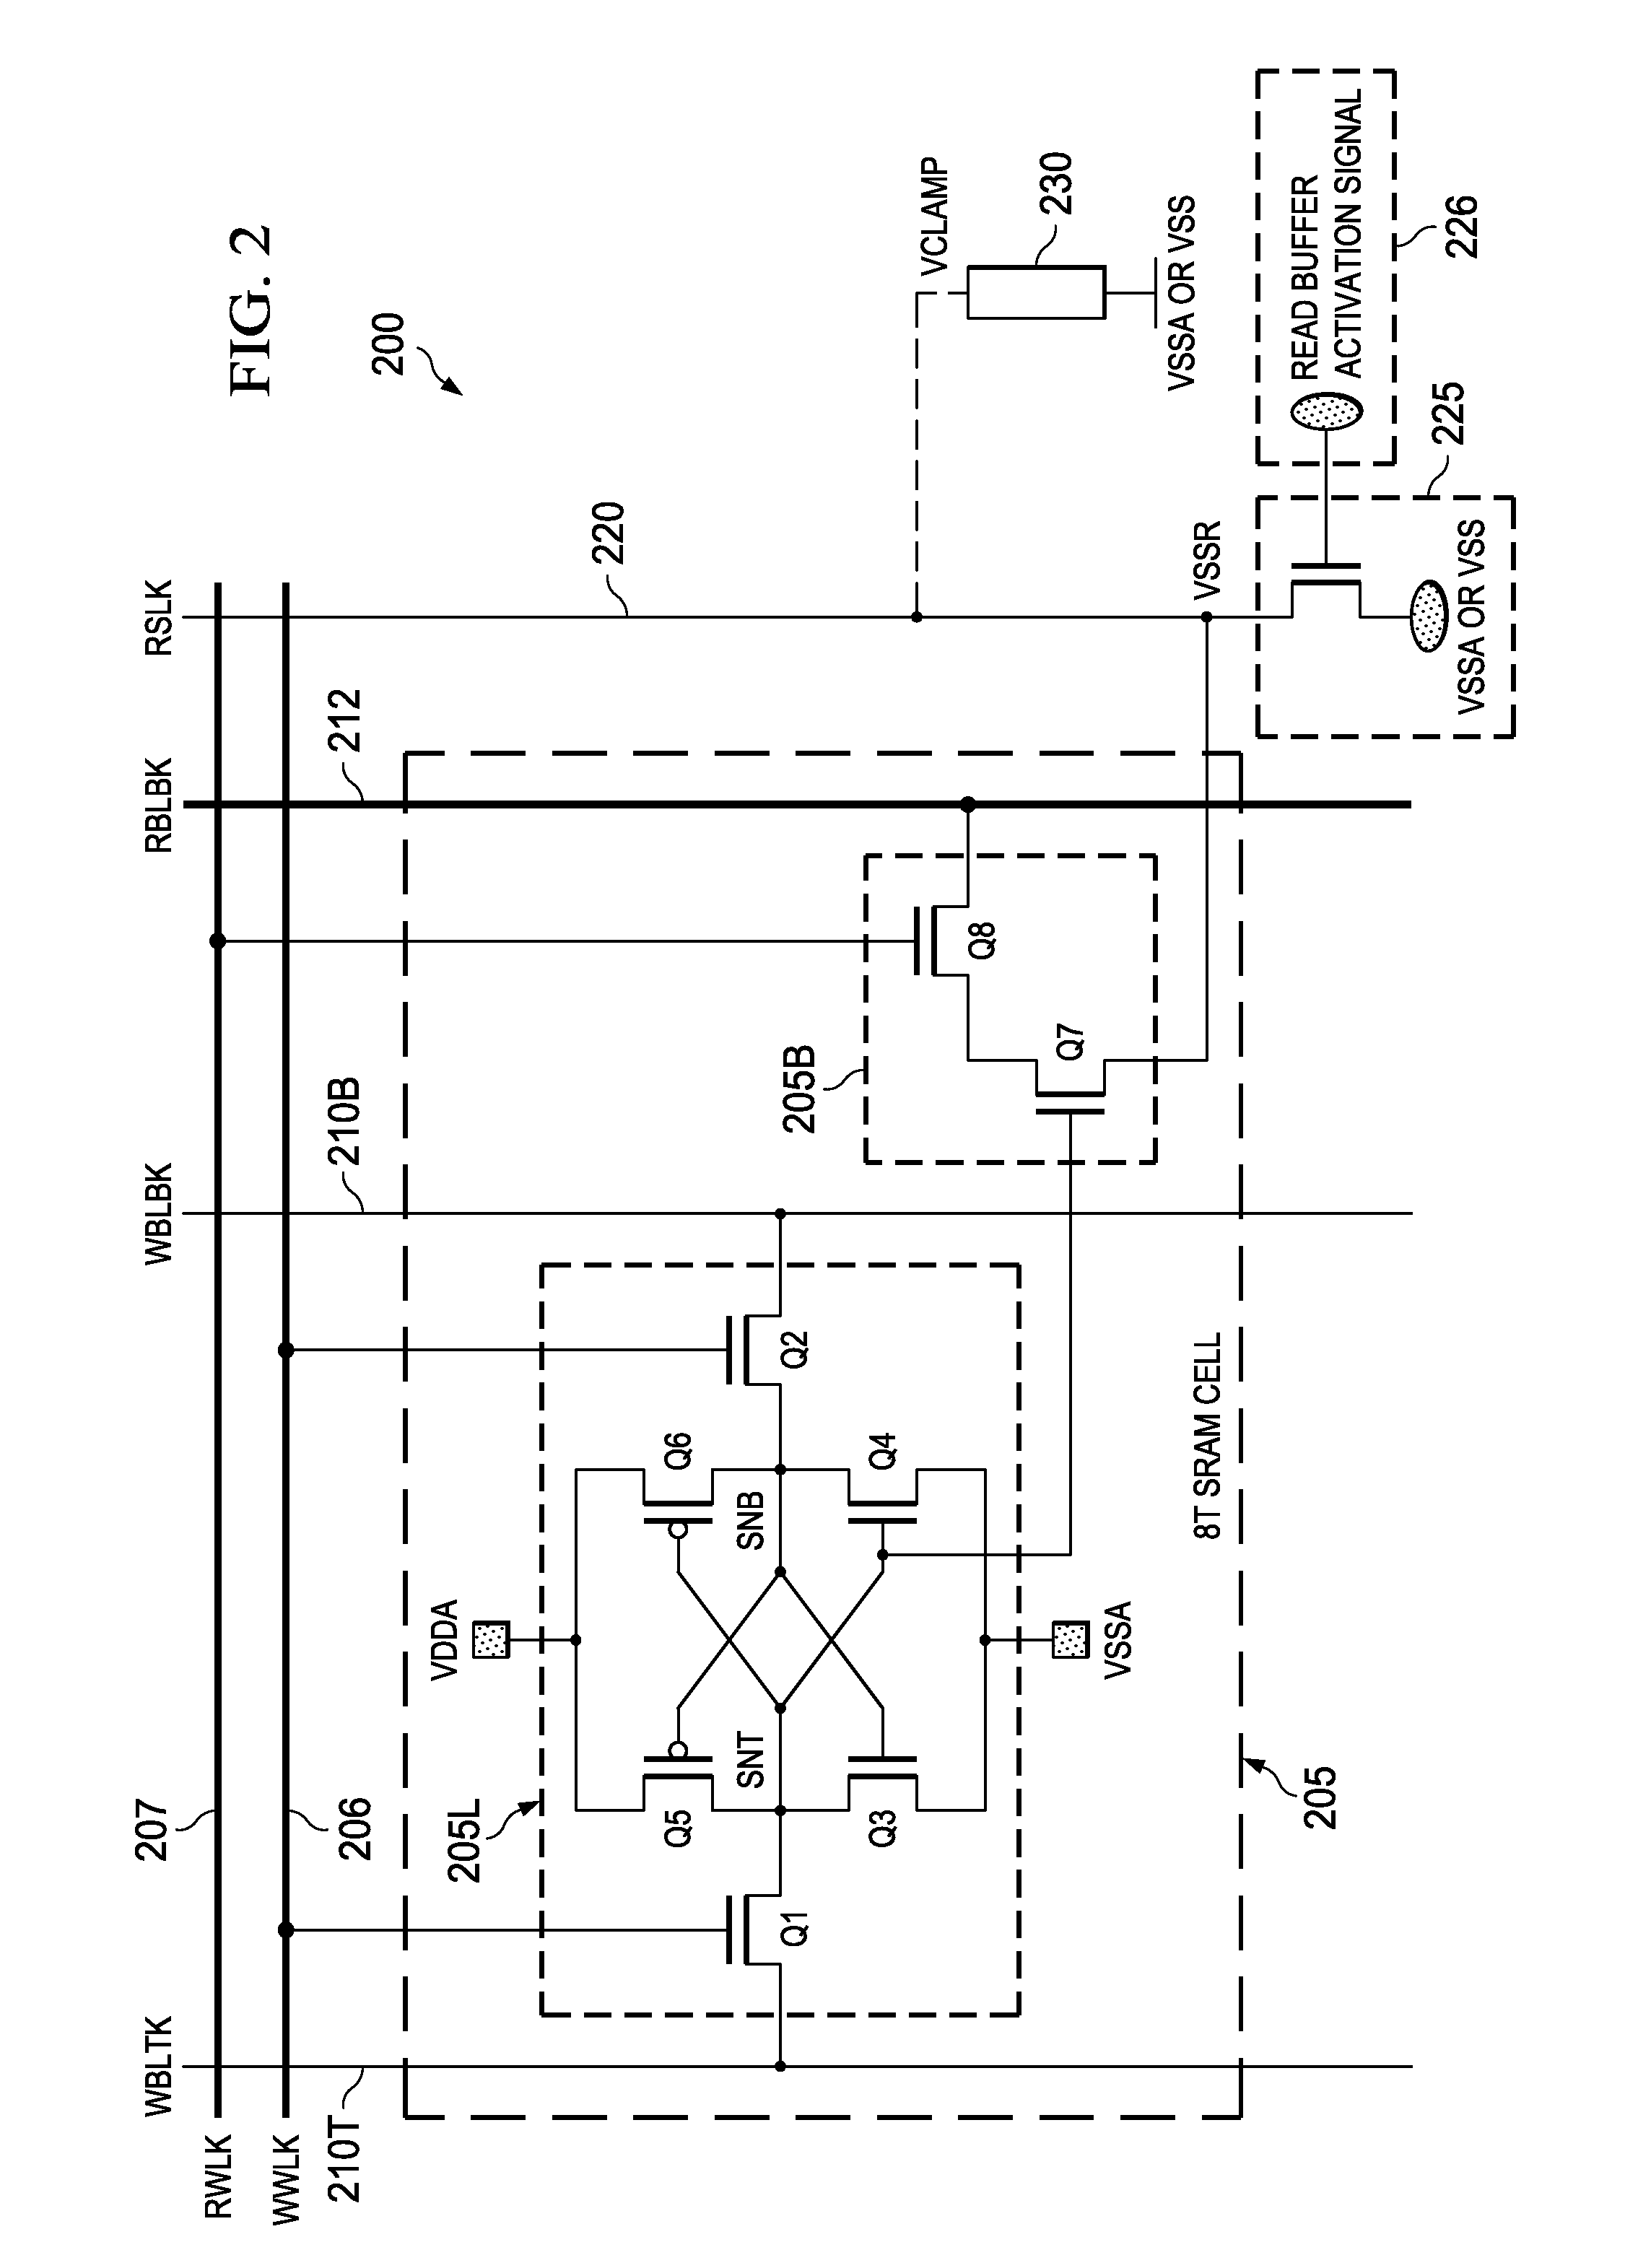 SRAM cell with read buffer controlled for low leakage current